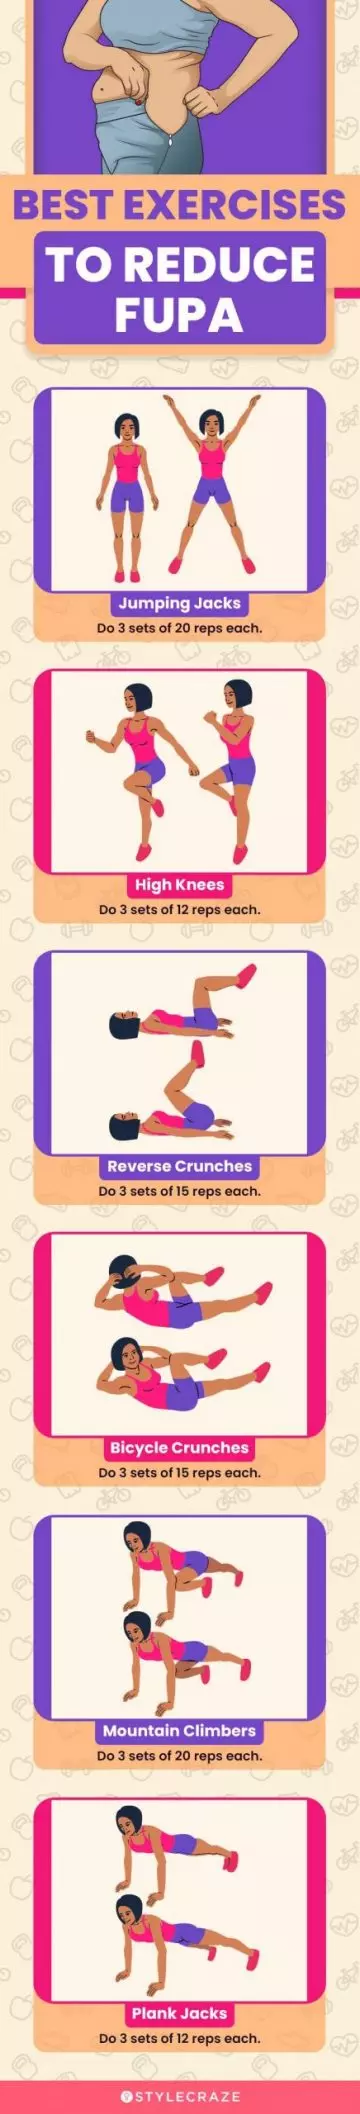 best exercises to reduce fupa (infographic)